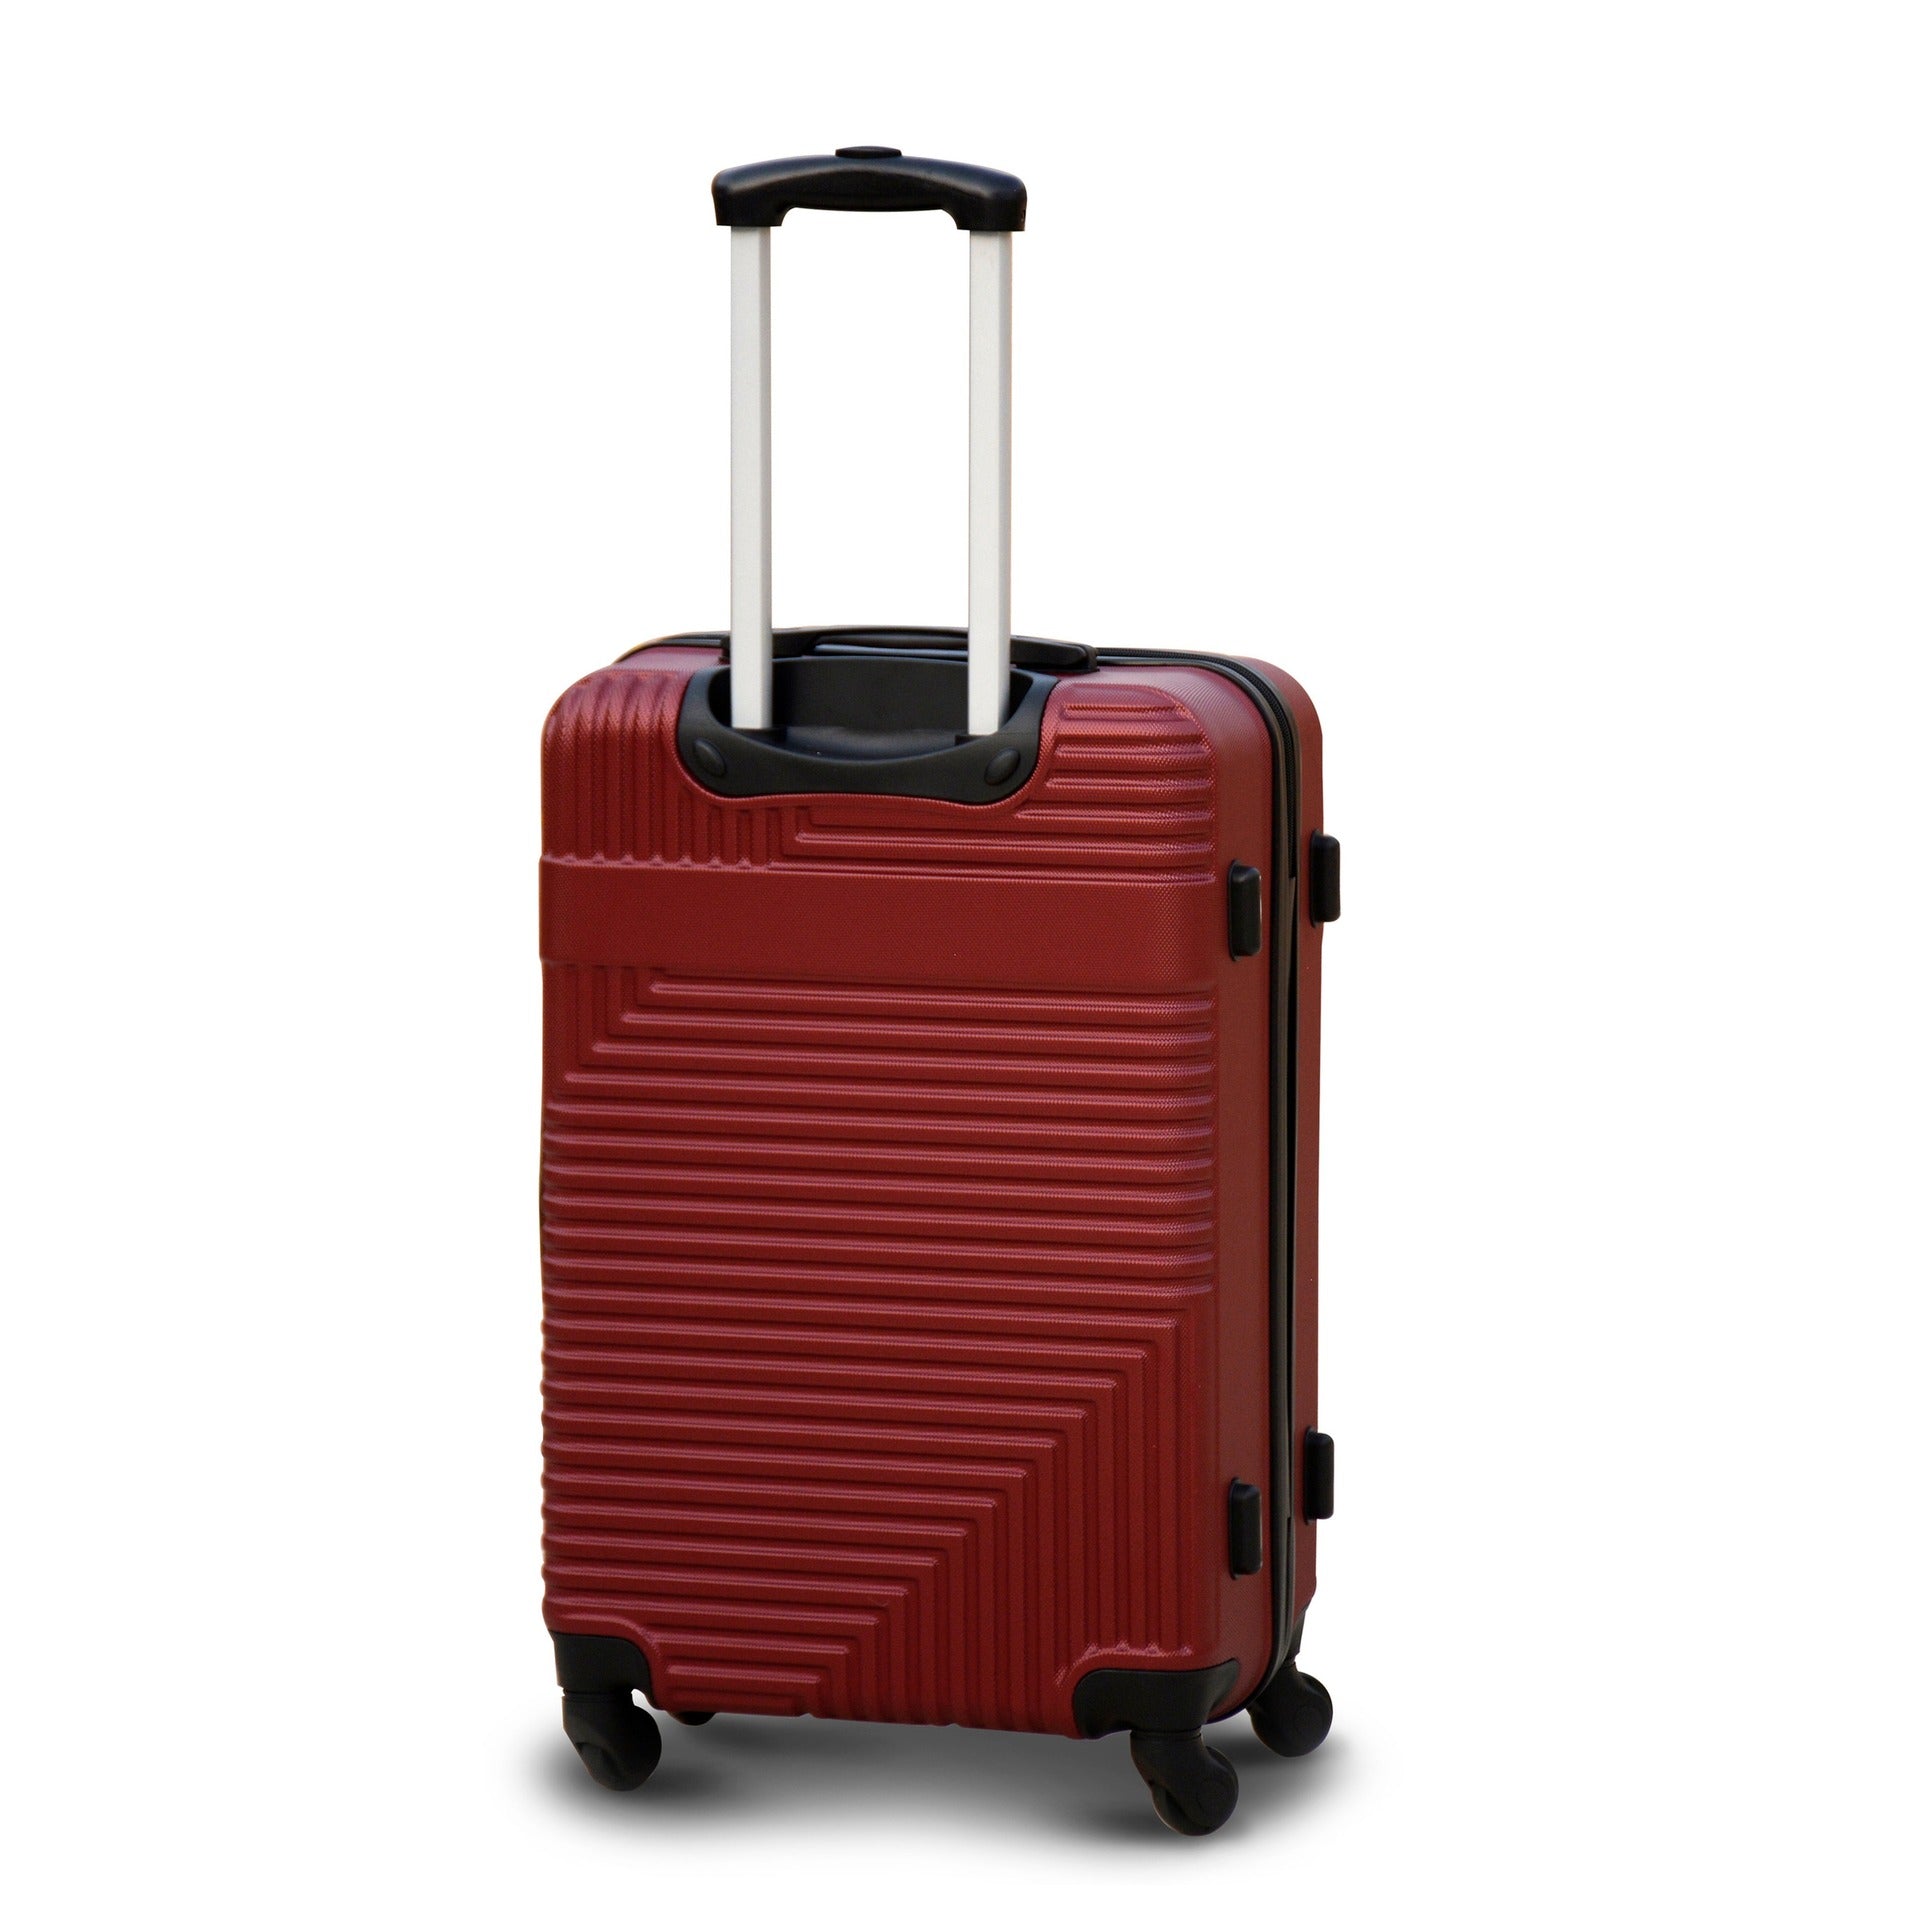 32" Red Colour Travel Way ABS Luggage Lightweight Hard Case Trolley Bag with Spinner Wheel